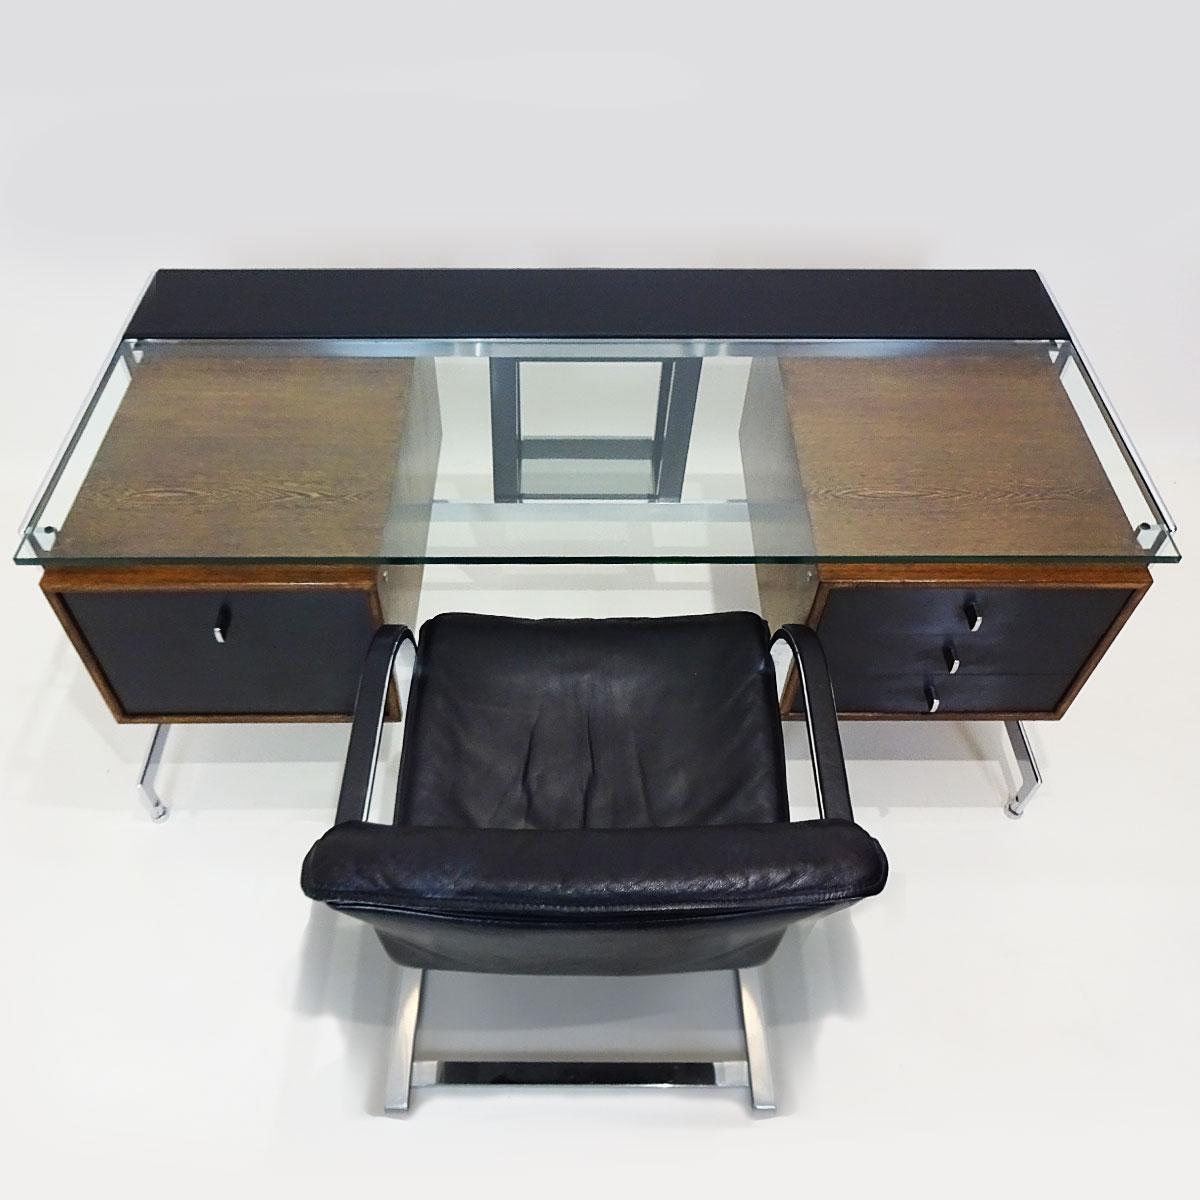 Bespoke 1969 executive desk, model JK 212, by Jørgen Kastholm with complimentary chair

An exceptional Bespoke midcentury executive desk constructed in Wenge, stainless steel and chrome with matching black leather chair designed by Jørgen Kastholm